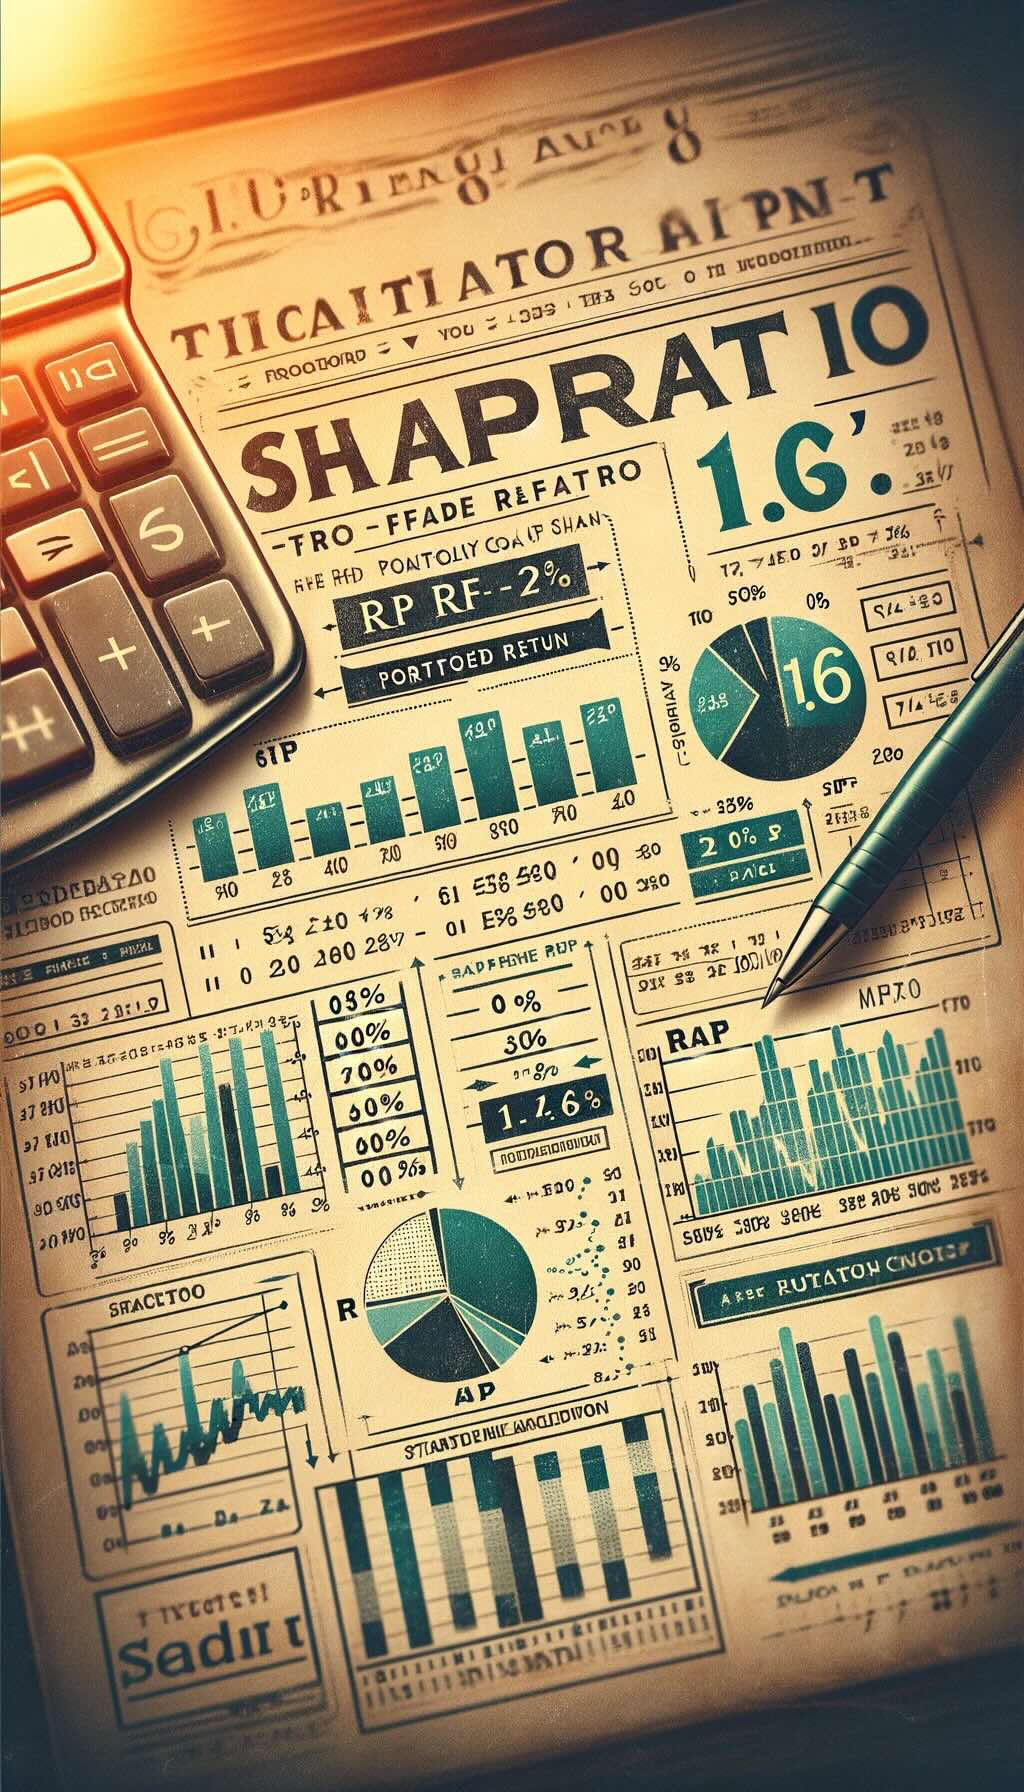 visualizing the Sharpe Ratio formula, incorporating elements like an old calculator, graphs, and ledgers to illustrate the formula and its example calculation